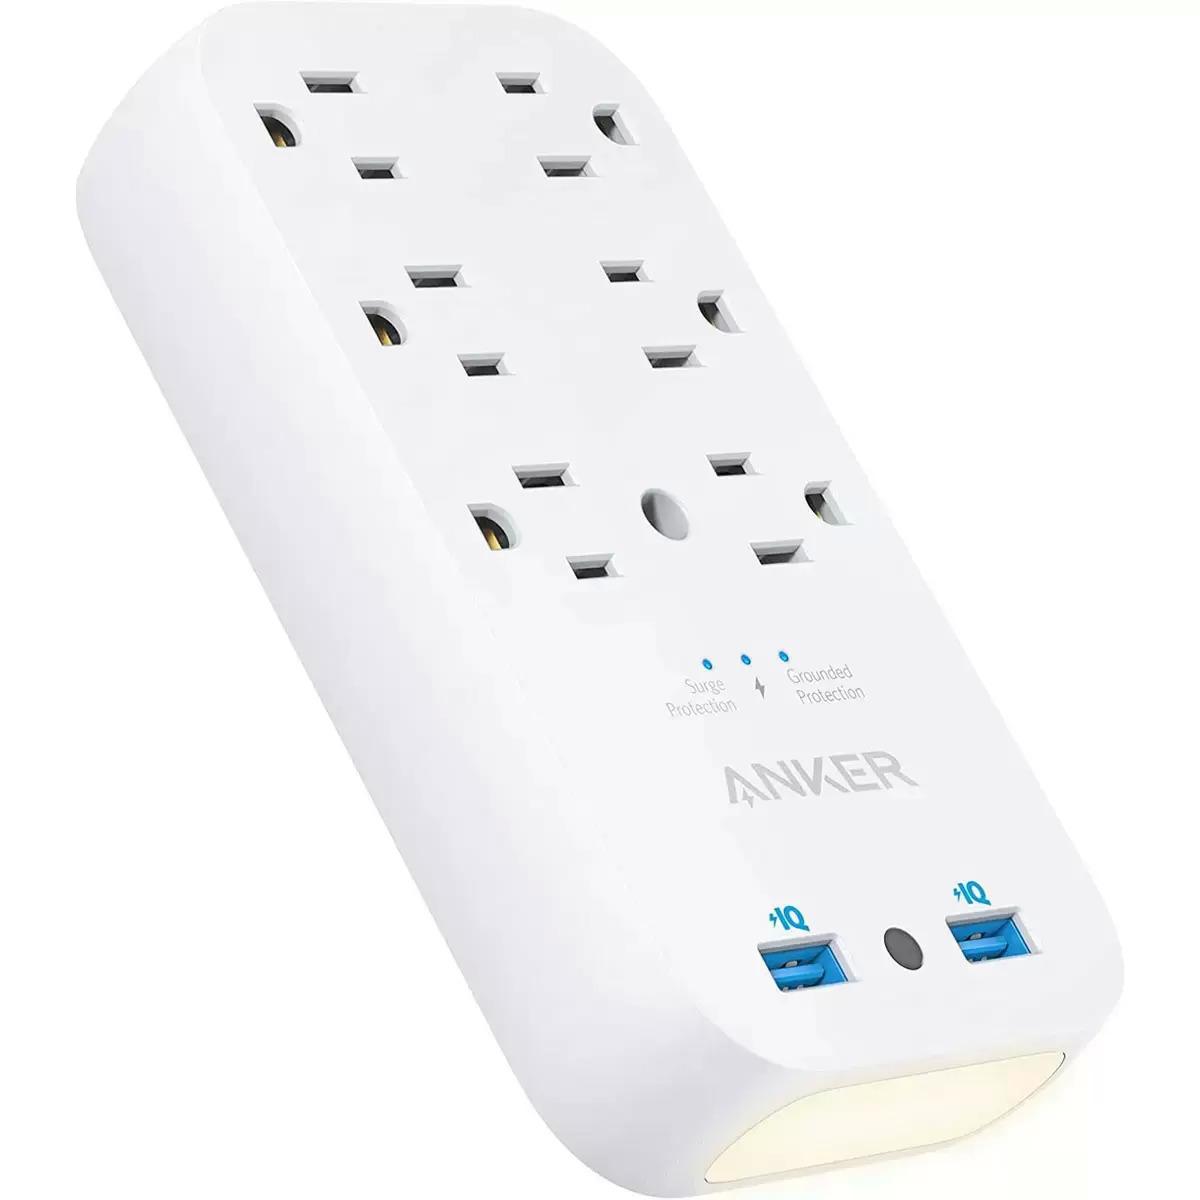 Anker 18W Outlet Extender with 6 AC Outlets for $13.99